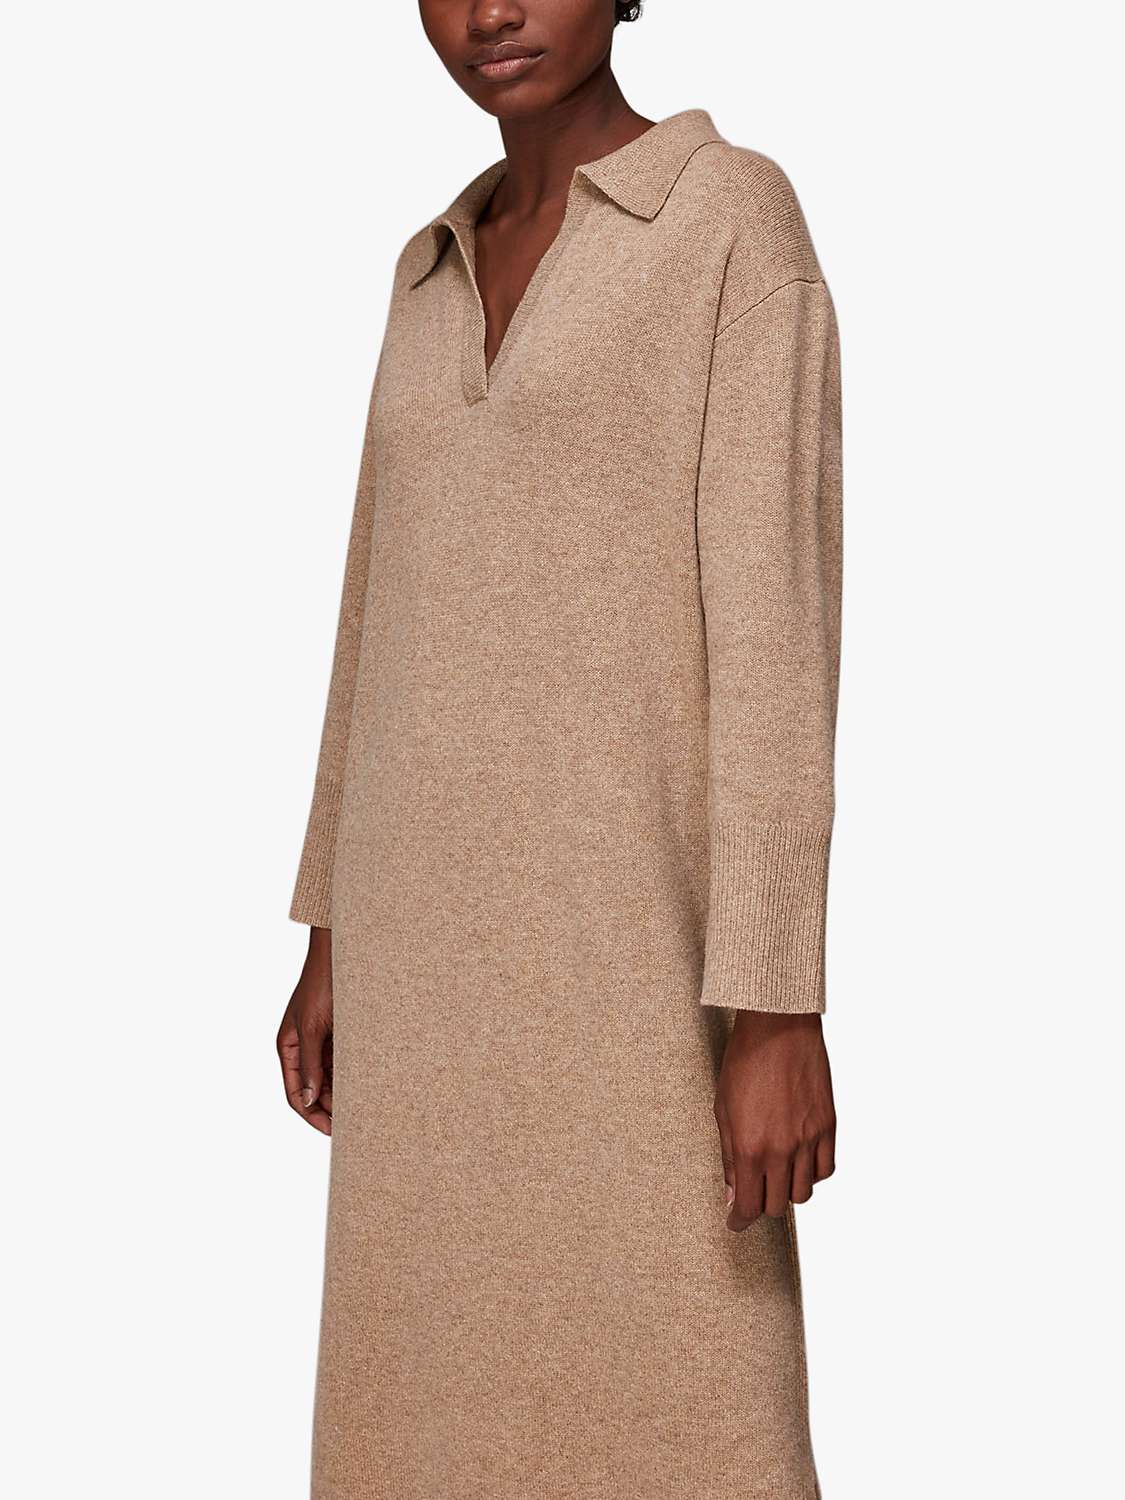 Buy Whistles Wool Blend Collar Knitted Midi Dress Online at johnlewis.com